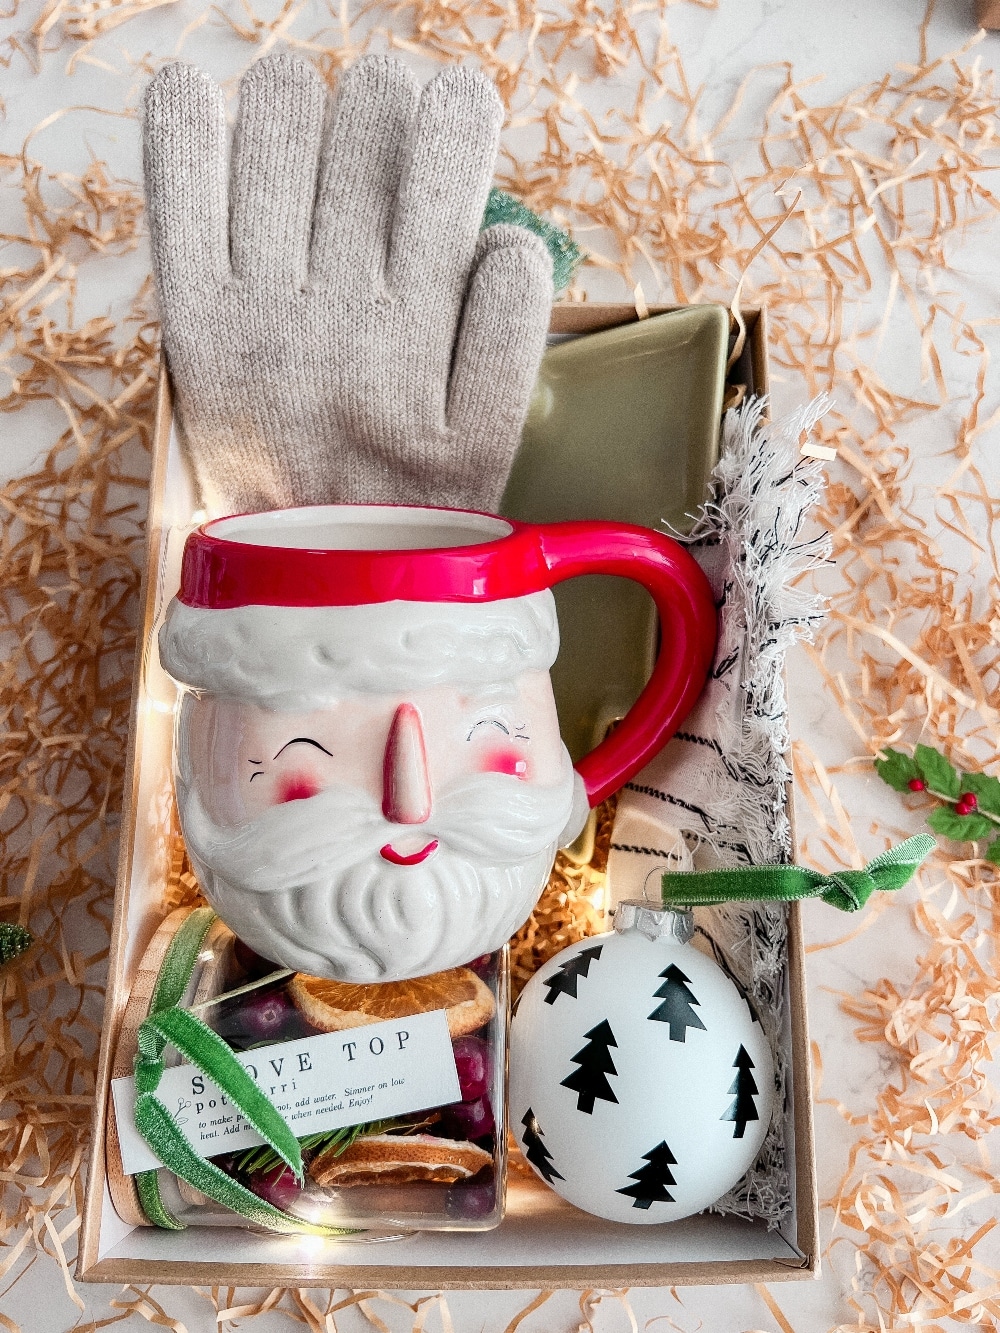 Warm and Cozy Hygge Christmas Gift Boxes. Gift your friends and neighbors with gift boxes full of warm and cozy items they can use this Christmas season! 